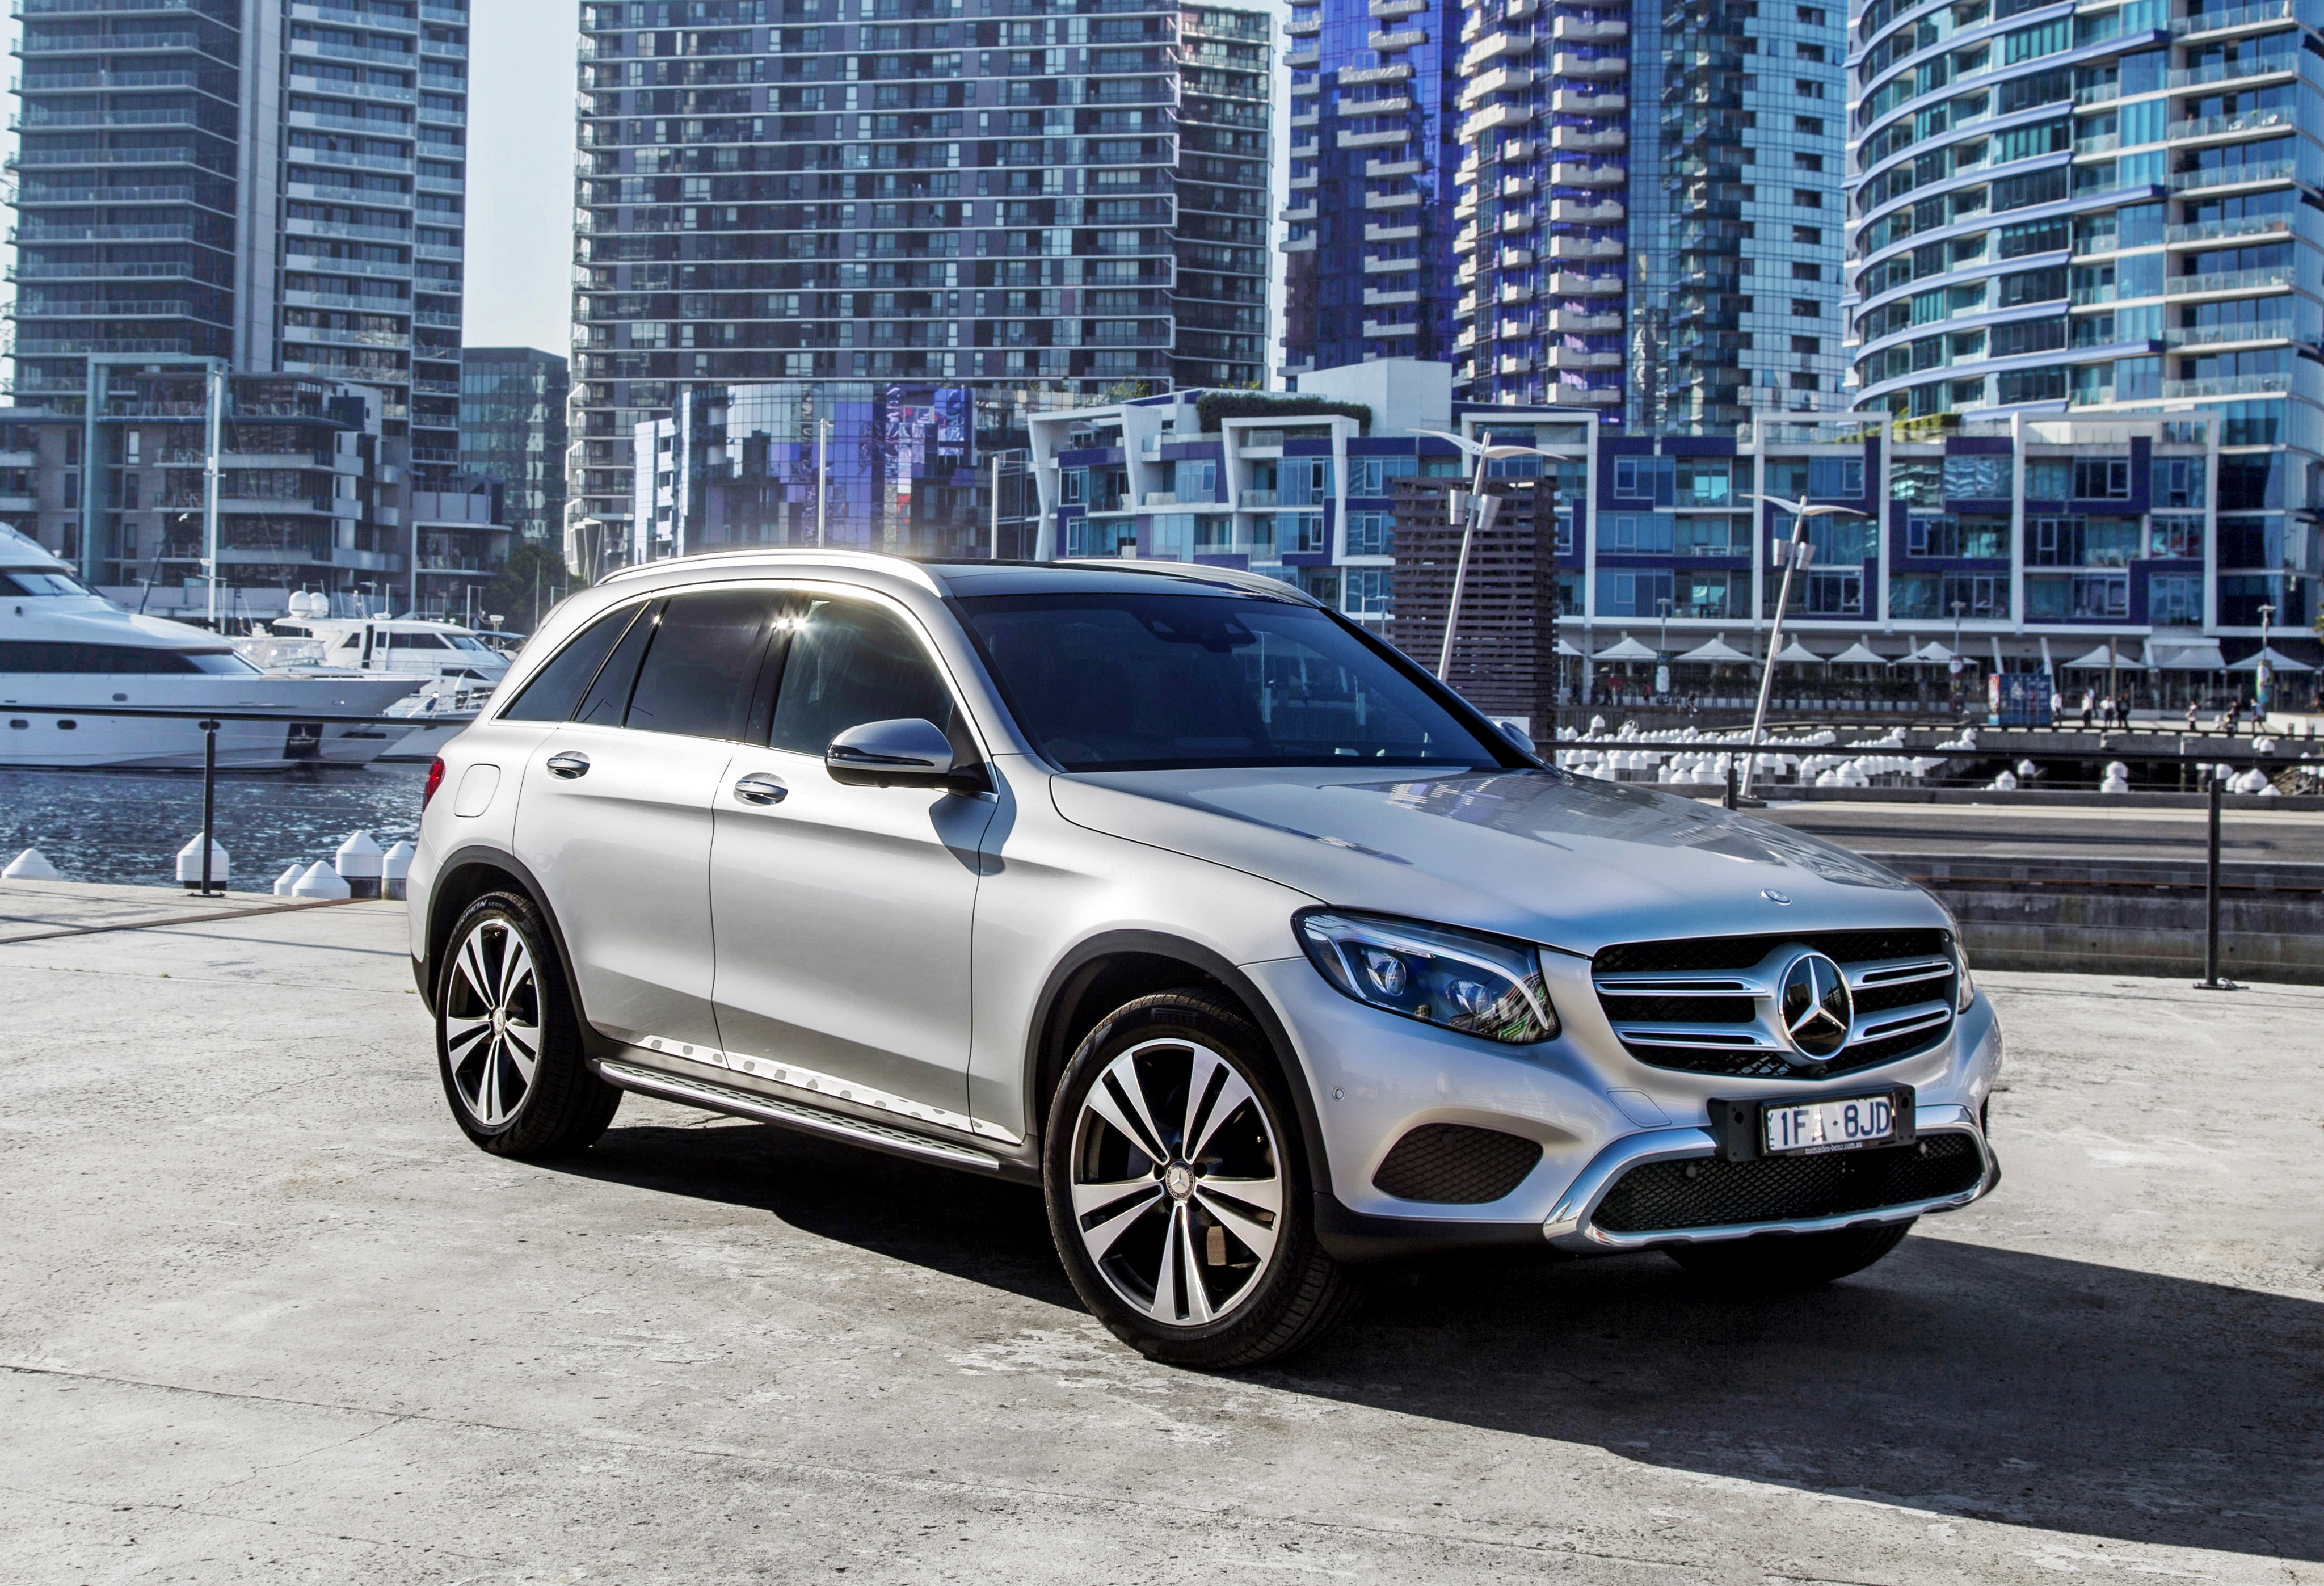 Free photo Mercedes benz glc in front of the houses